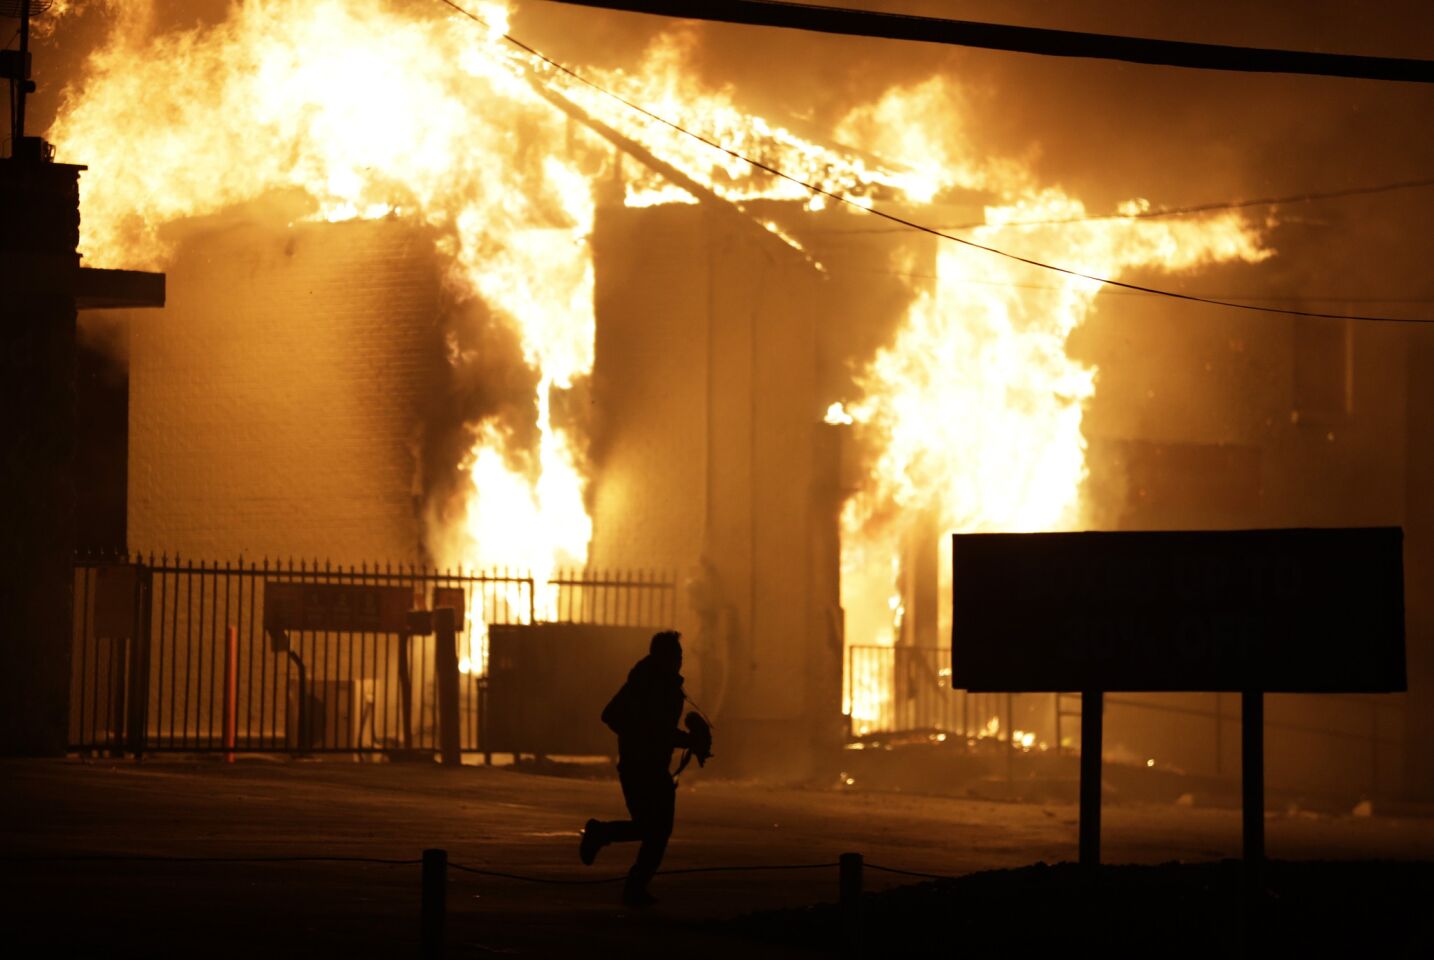 A man runs away from a burning storage facility in Ferguson, Mo., after the announcement of the grand jury decision.